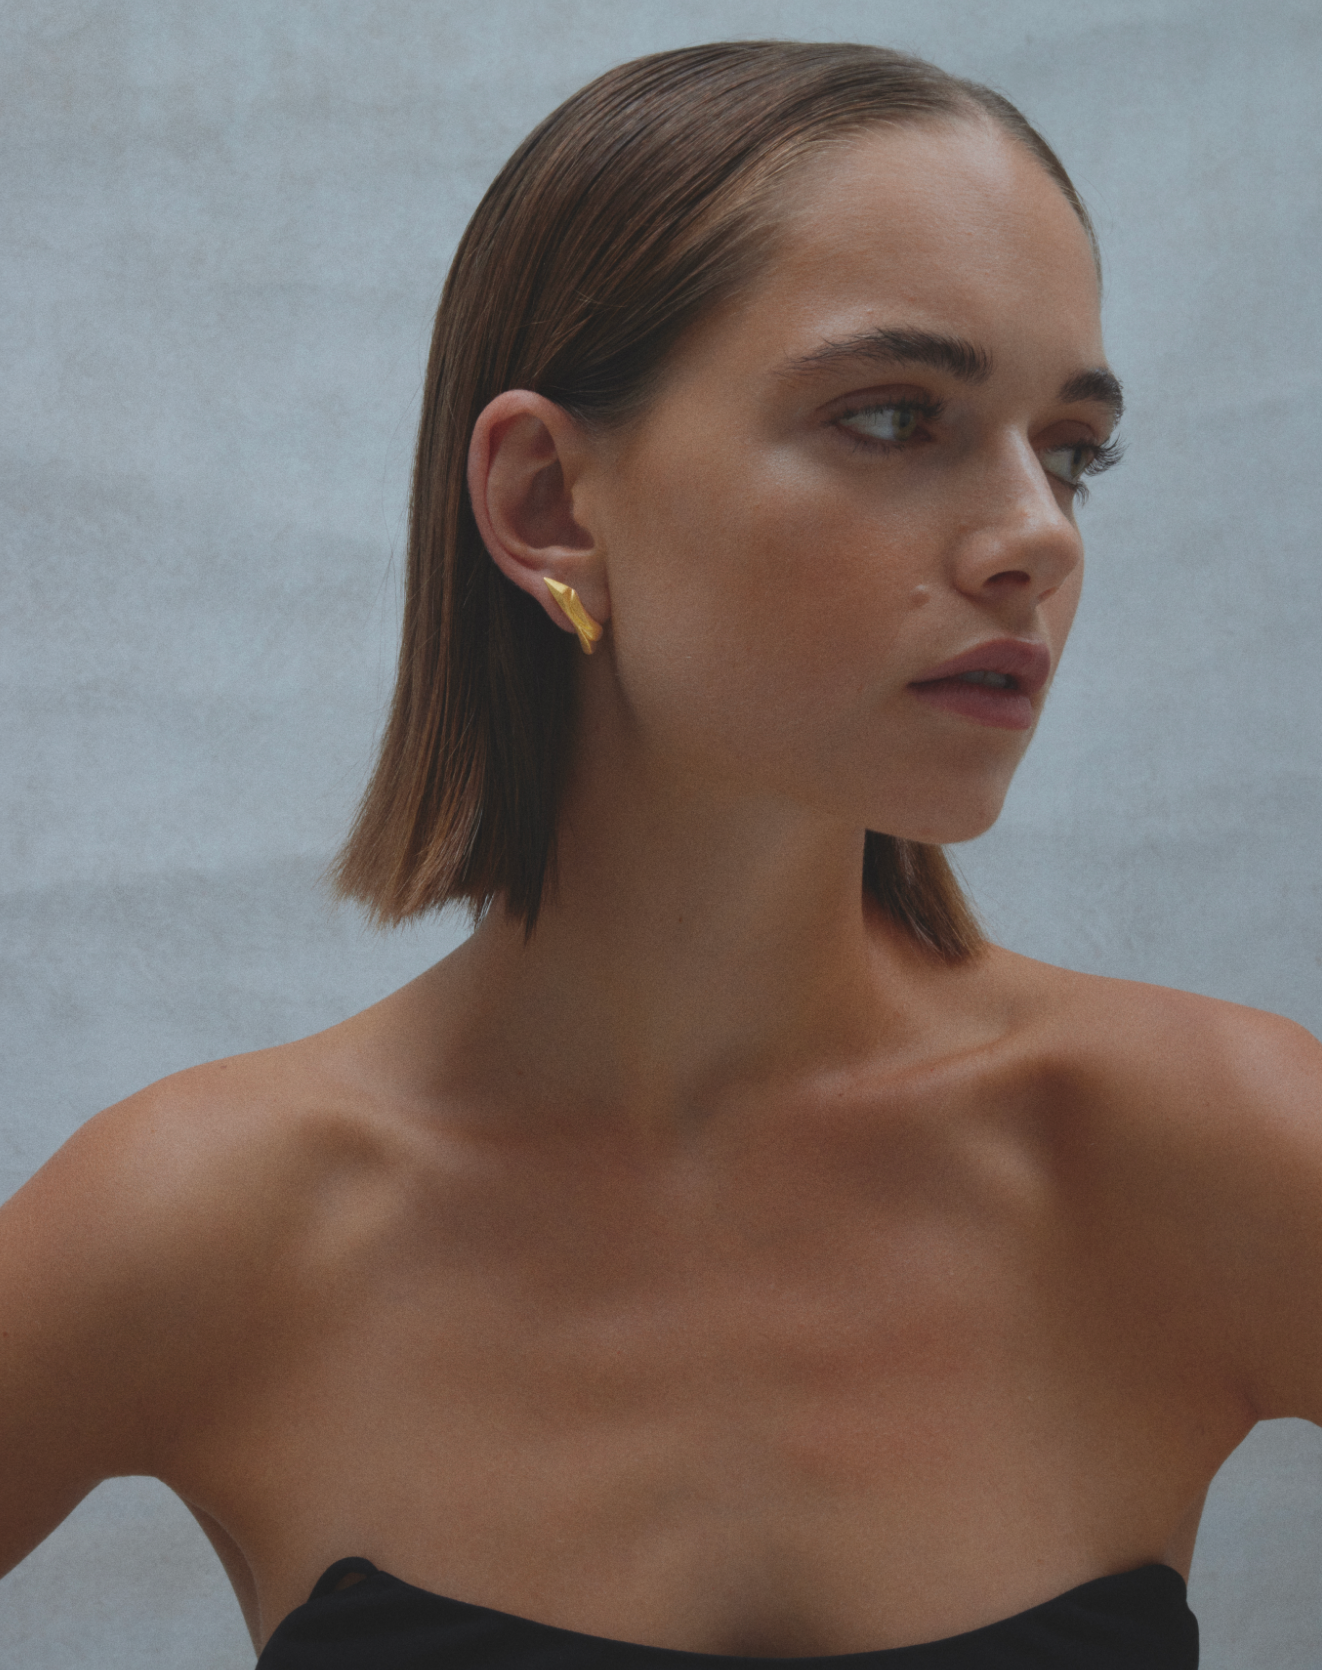 i seira model, wearing the sculptural climber earrings with her head slightly turned